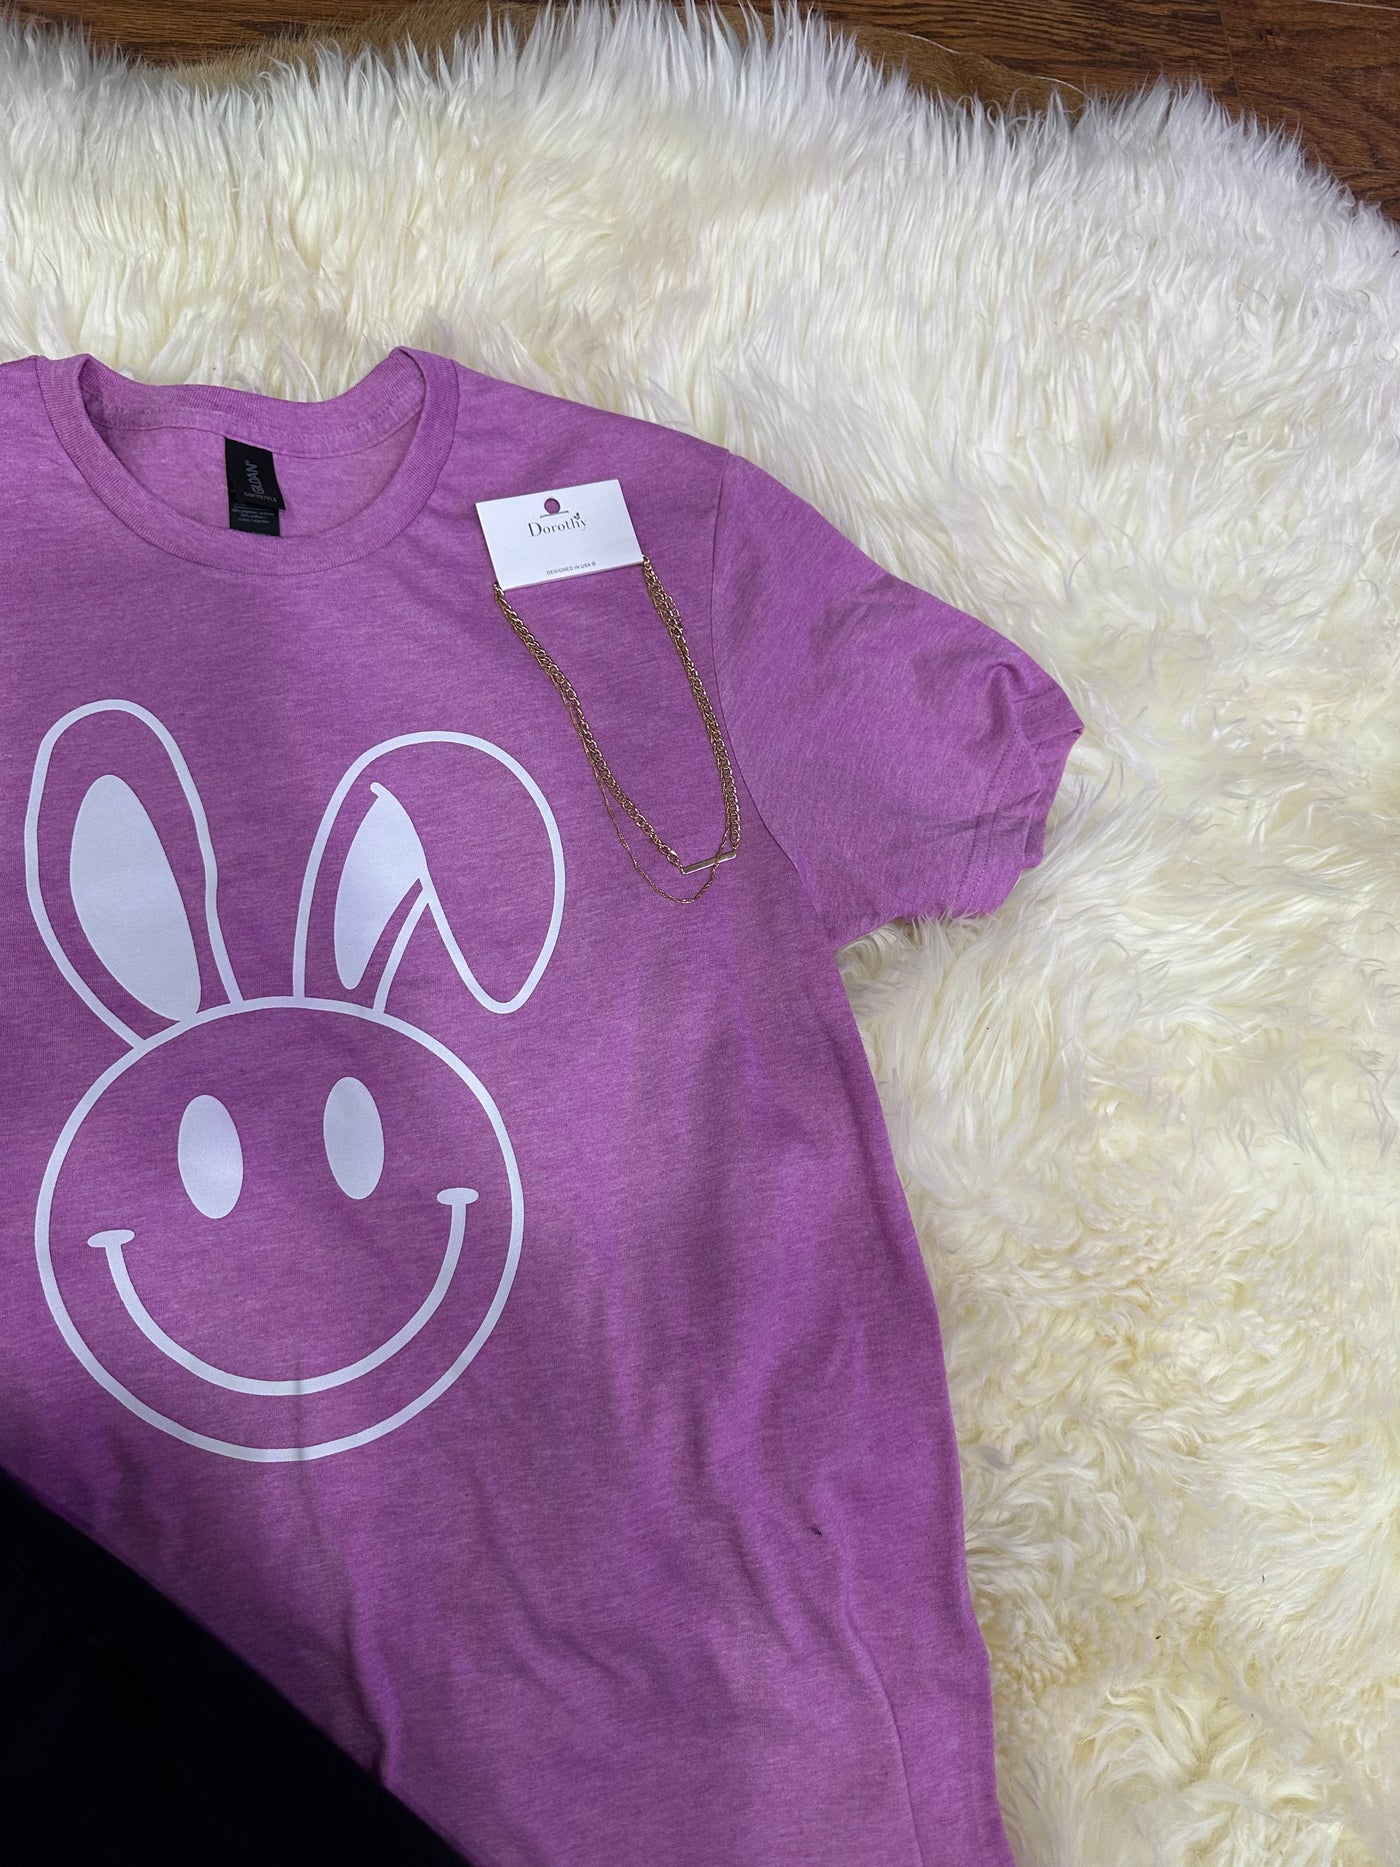 Bunny Smiles Tee on Heather Orchid